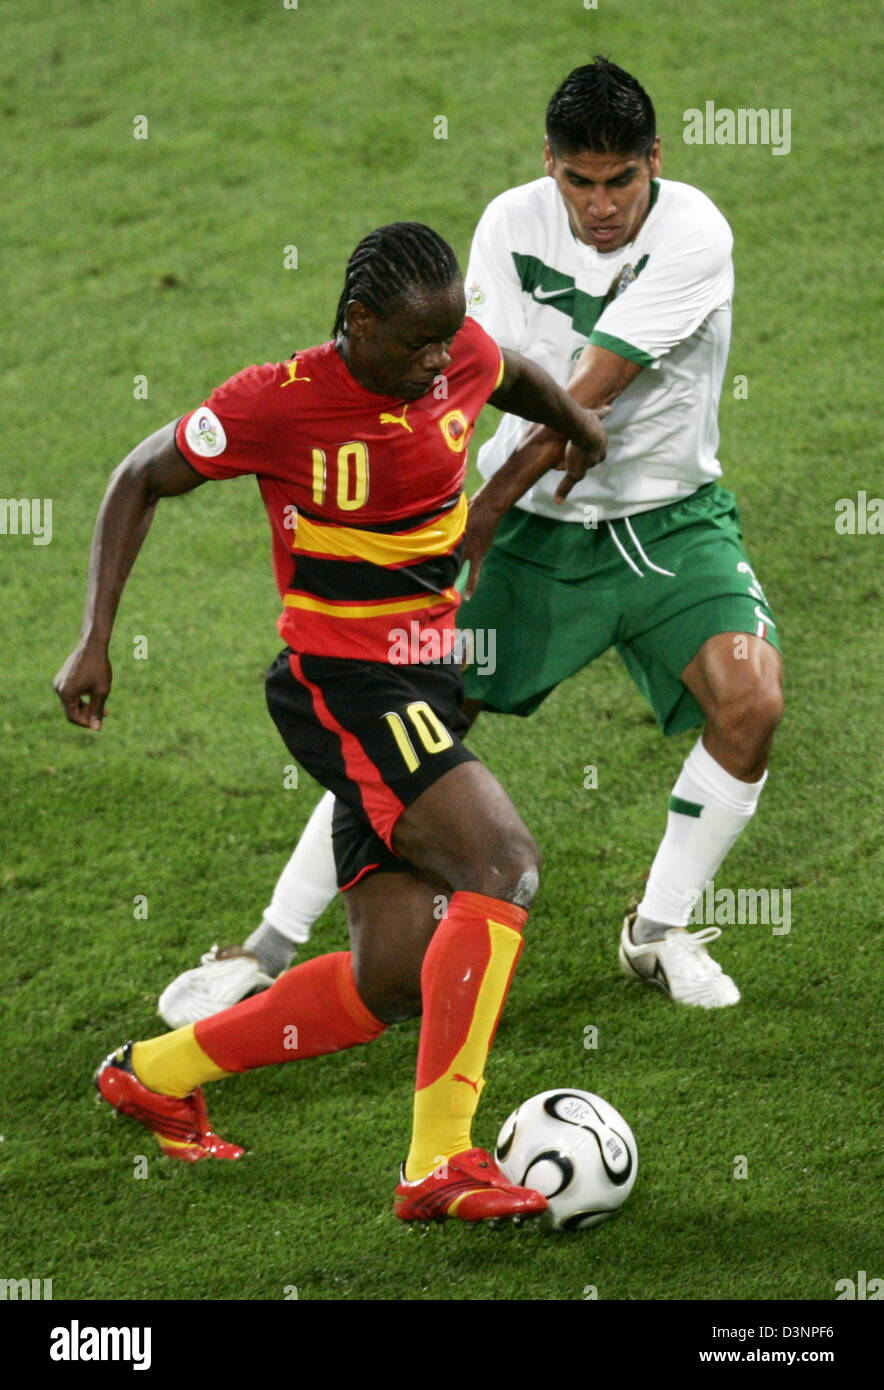 Mexican player Carlos Salcido (R) vies with Akwa (L) from Angola during the group D preliminary match of the 2006 FIFA World Cup between Mexico and Angola in Hanover, Germany, Friday, 16 June 2006. Photo: RAINER JENSEN +++ Mobile Services OUT +++ Please also refer to FIFA's Terms and Conditions. Stock Photo